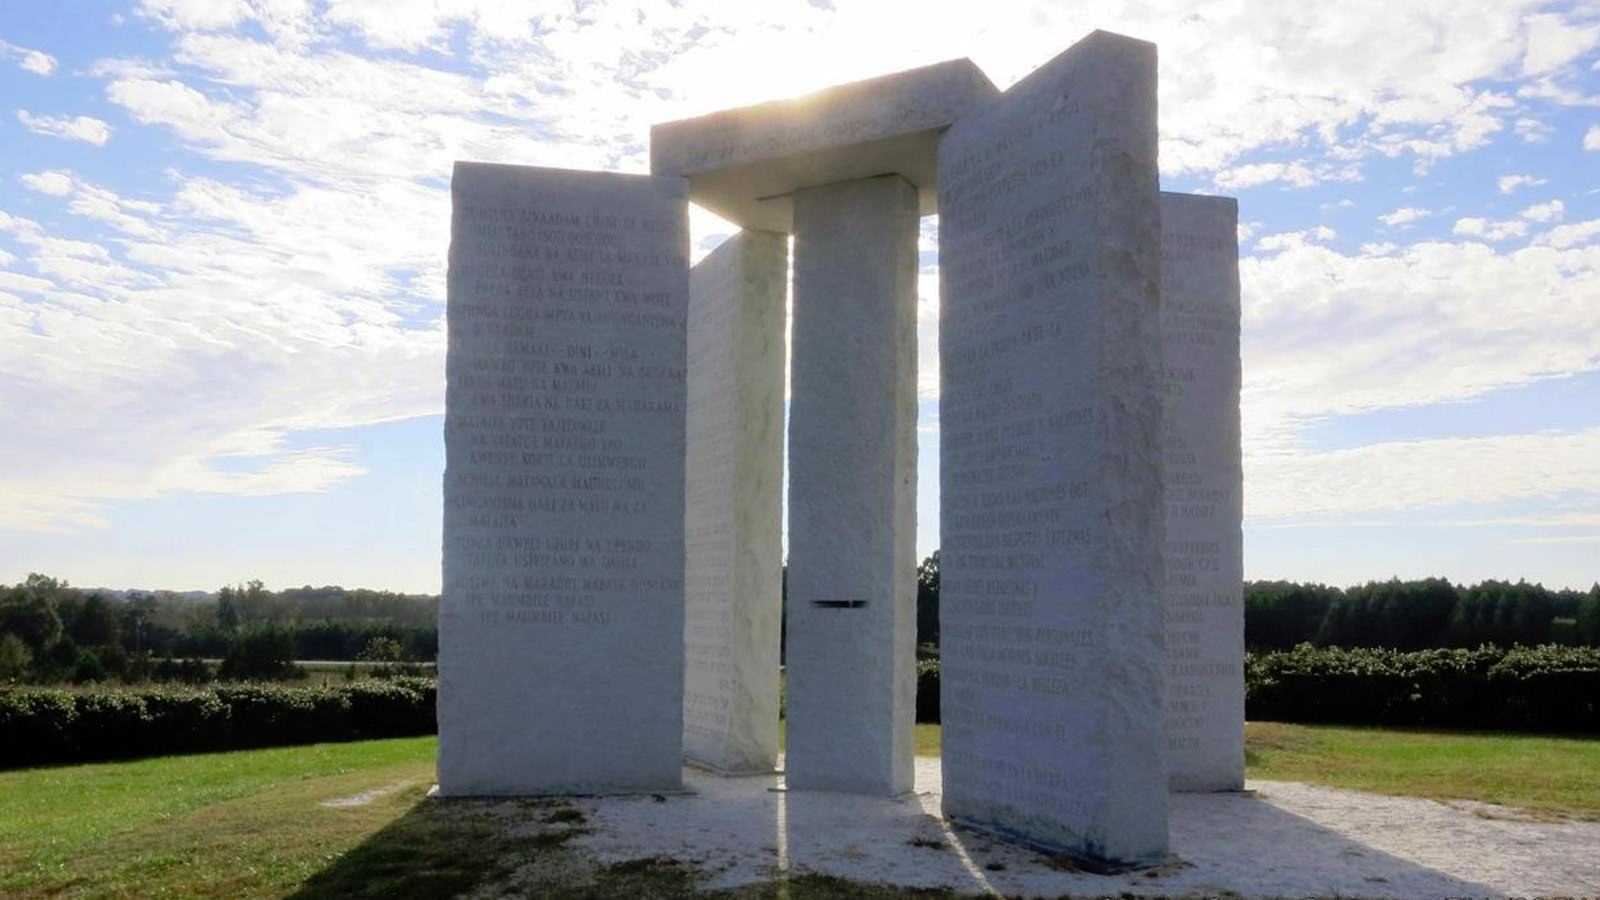 Georgia Guidestones. Sometimes called the “American Stonehenge,” the granite monument was built in 1979 in Elbert County, Georgia, in a field off Highway 77. It contains ten commandments for “an Age of Reason,” written in eight languages — English, Spanish, Swahili, Hindi, Hebrew, Arabic, Chinese and Russian. But these aren’t commandments like you’d find in the Old Testament. Some of the messages written on these four granite slabs, each almost 20 feet tall, are controversial, like this one: “Maintain humanity under 500,000,000 in perpetual balance with nature.” Stranger still, nobody is sure who paid for all this. The man claiming responsibility went by the pseudonym “R.C.